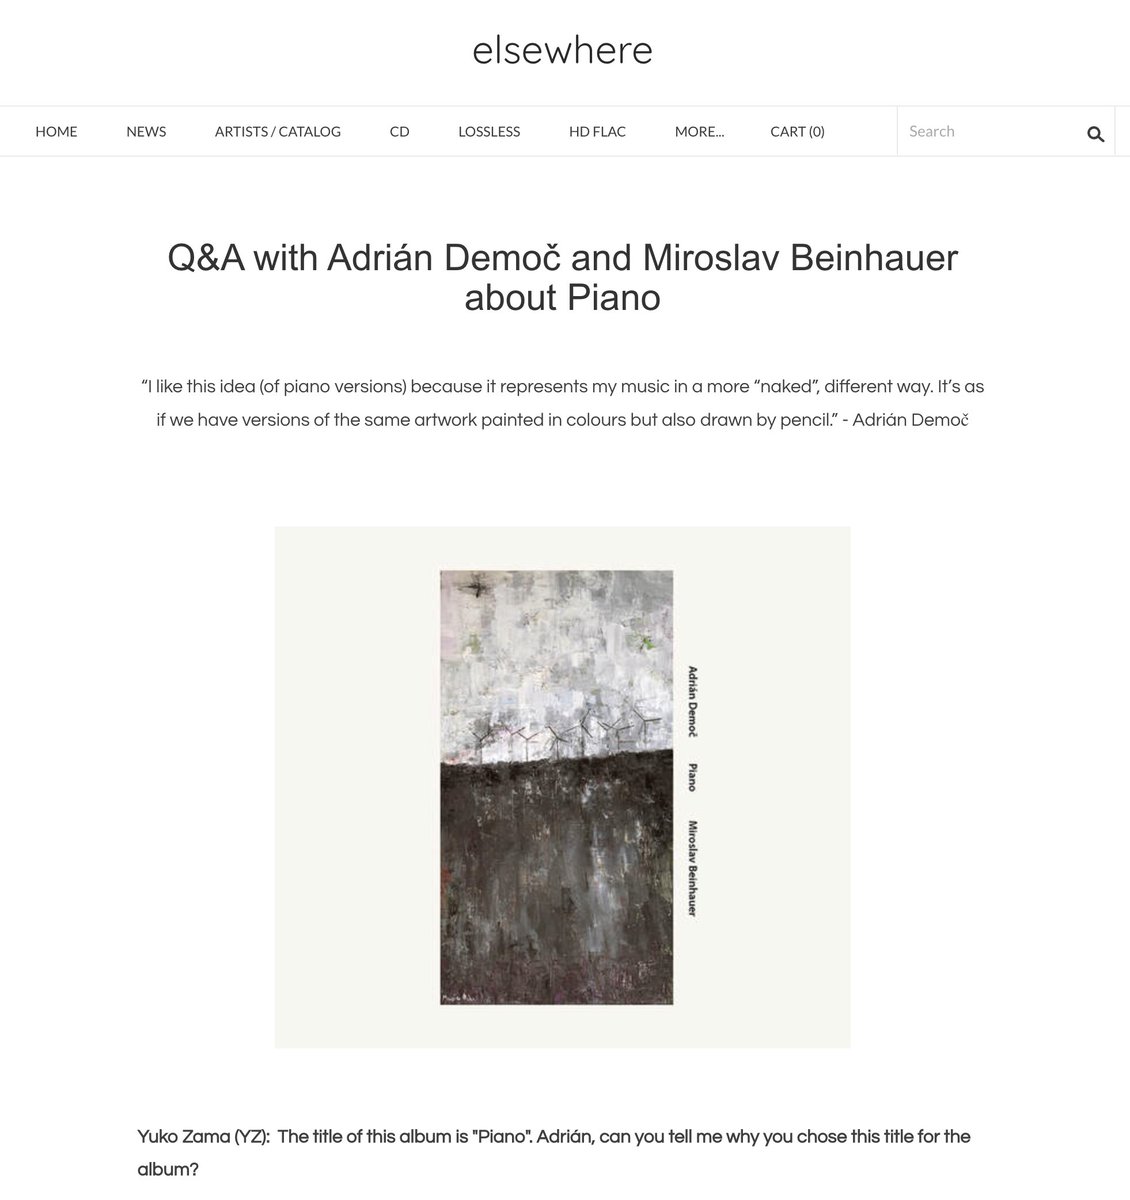 Q&A with Adrián Demoč and Miroslav Beinhauer about 'Piano' (elsewhere 031). elsewheremusic.net/qa-with-adrian…